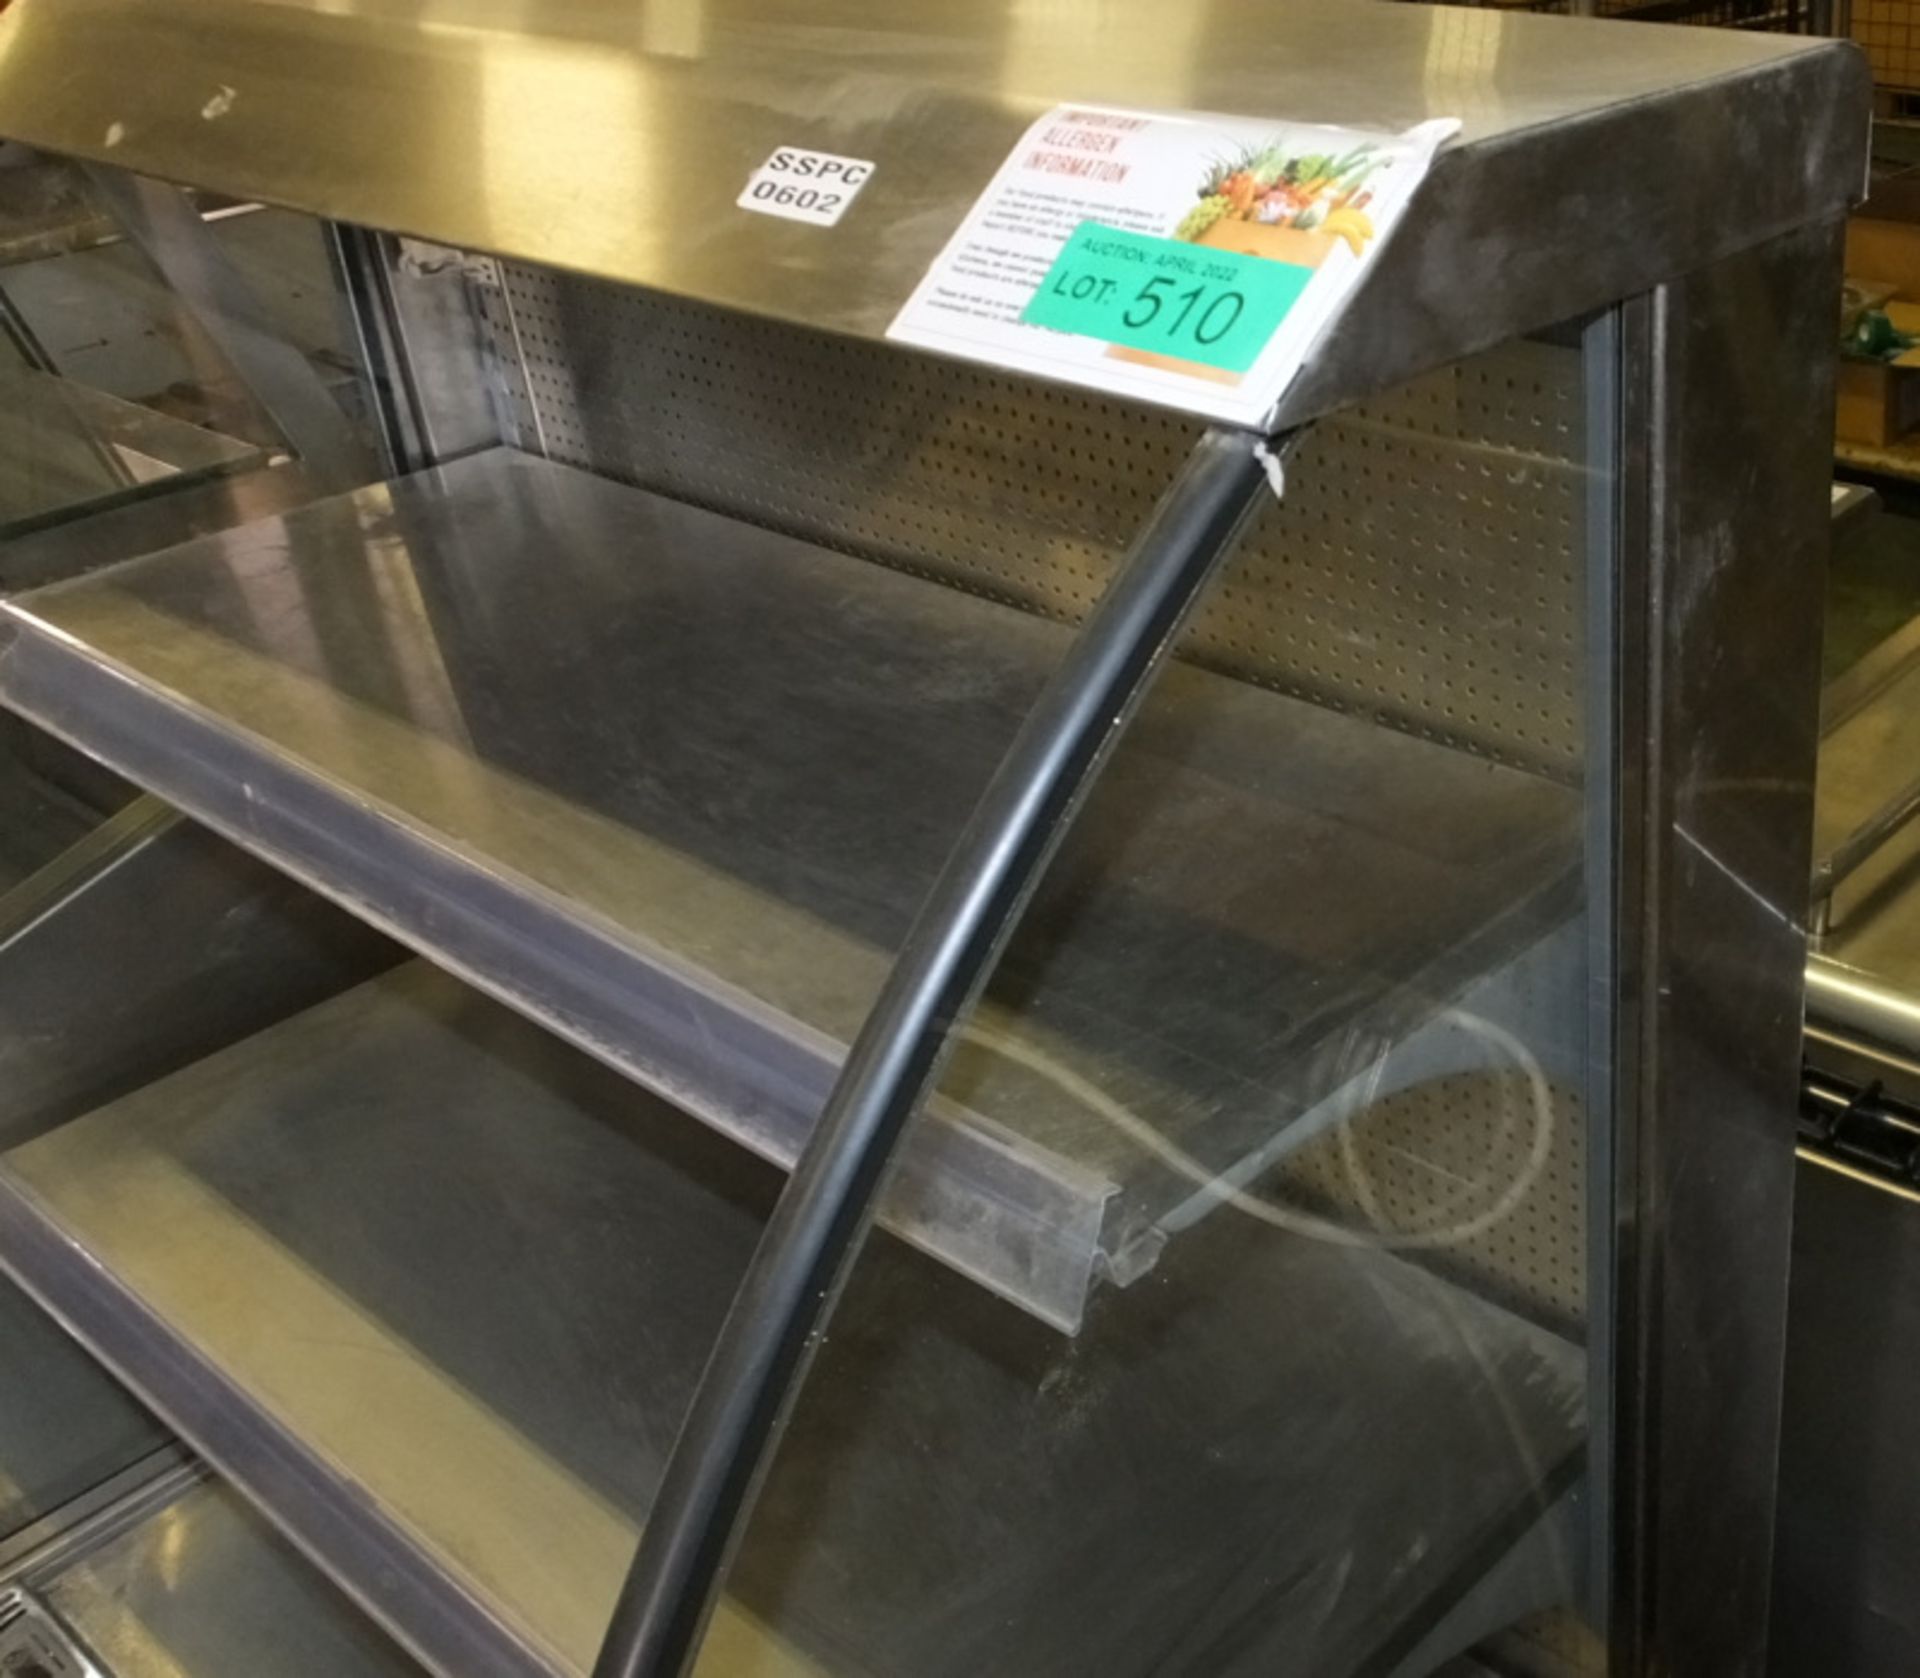 Norpe R404A Fridge Display Unit - L 890mm x W 760mm x H 1320 mm - Image 3 of 5